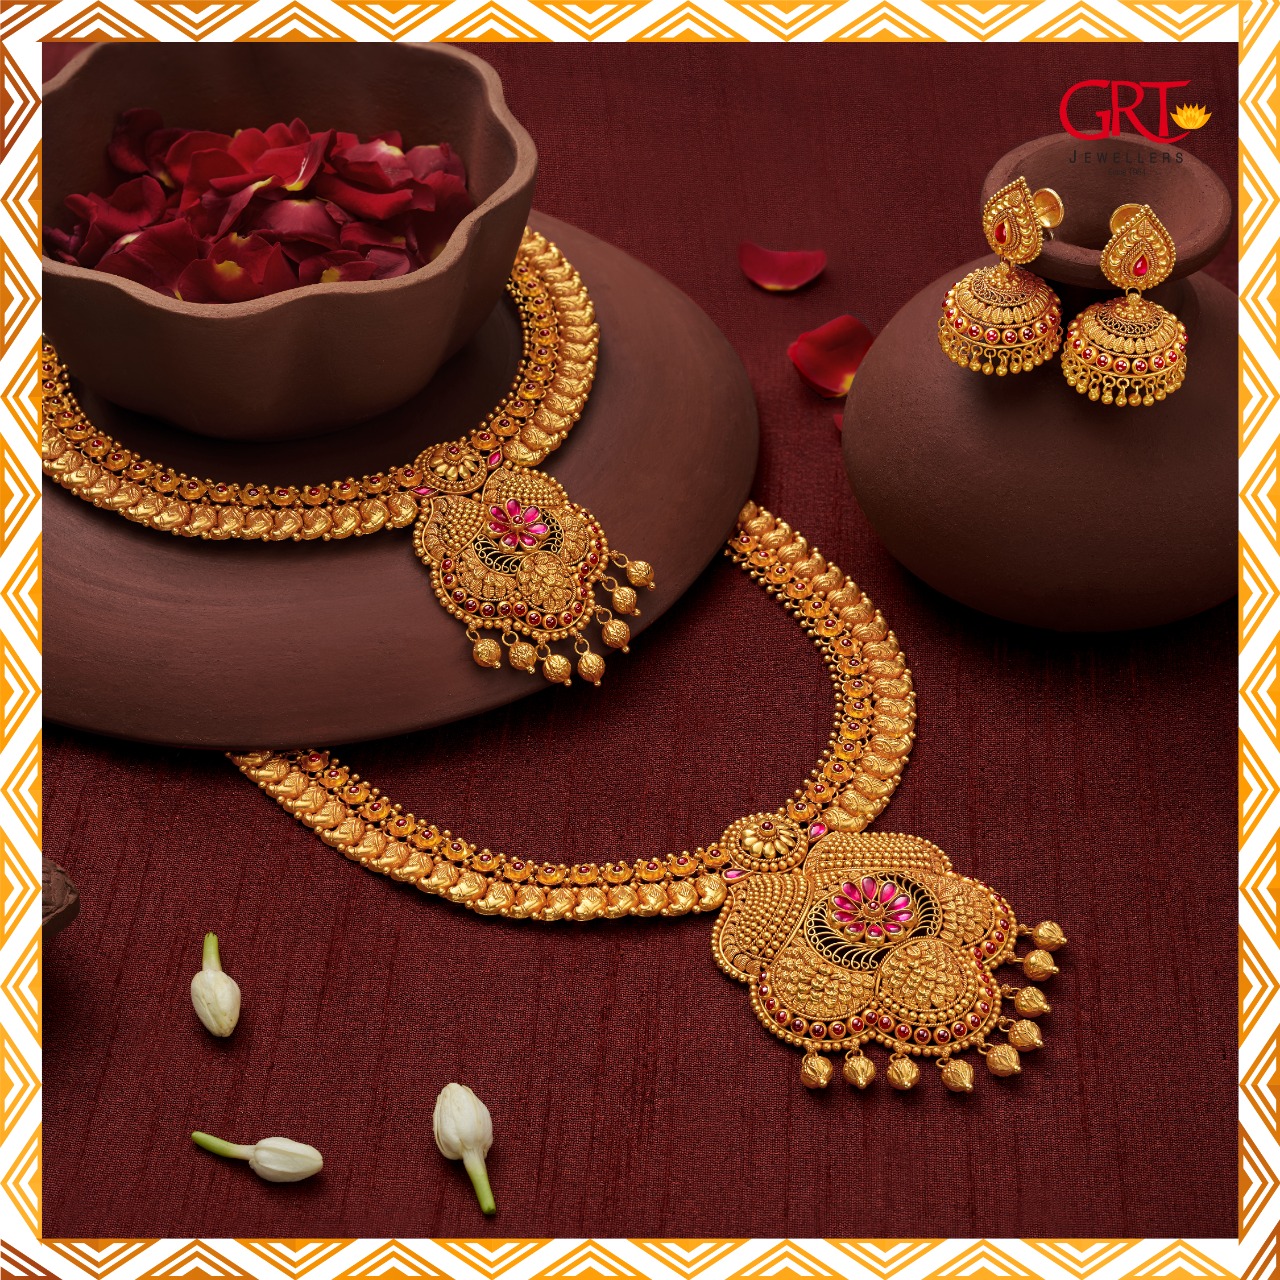 GRT Jewellers - Light-weight jewellery for this summer... | Facebook